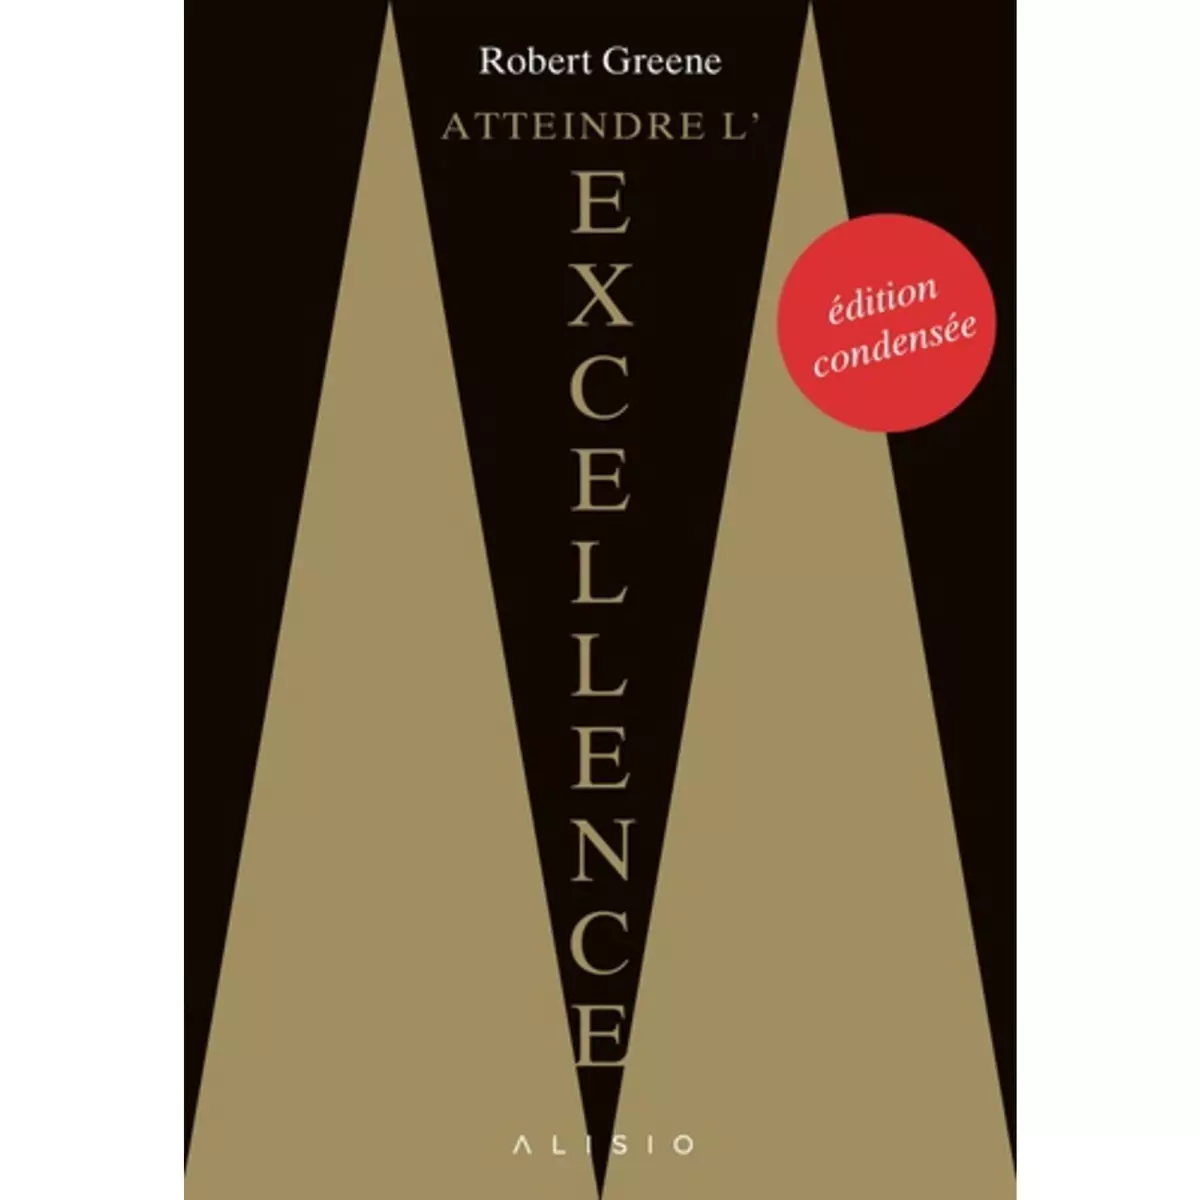  ATTEINDRE L'EXCELLENCE. TEXTE ABREGE, Greene Robert